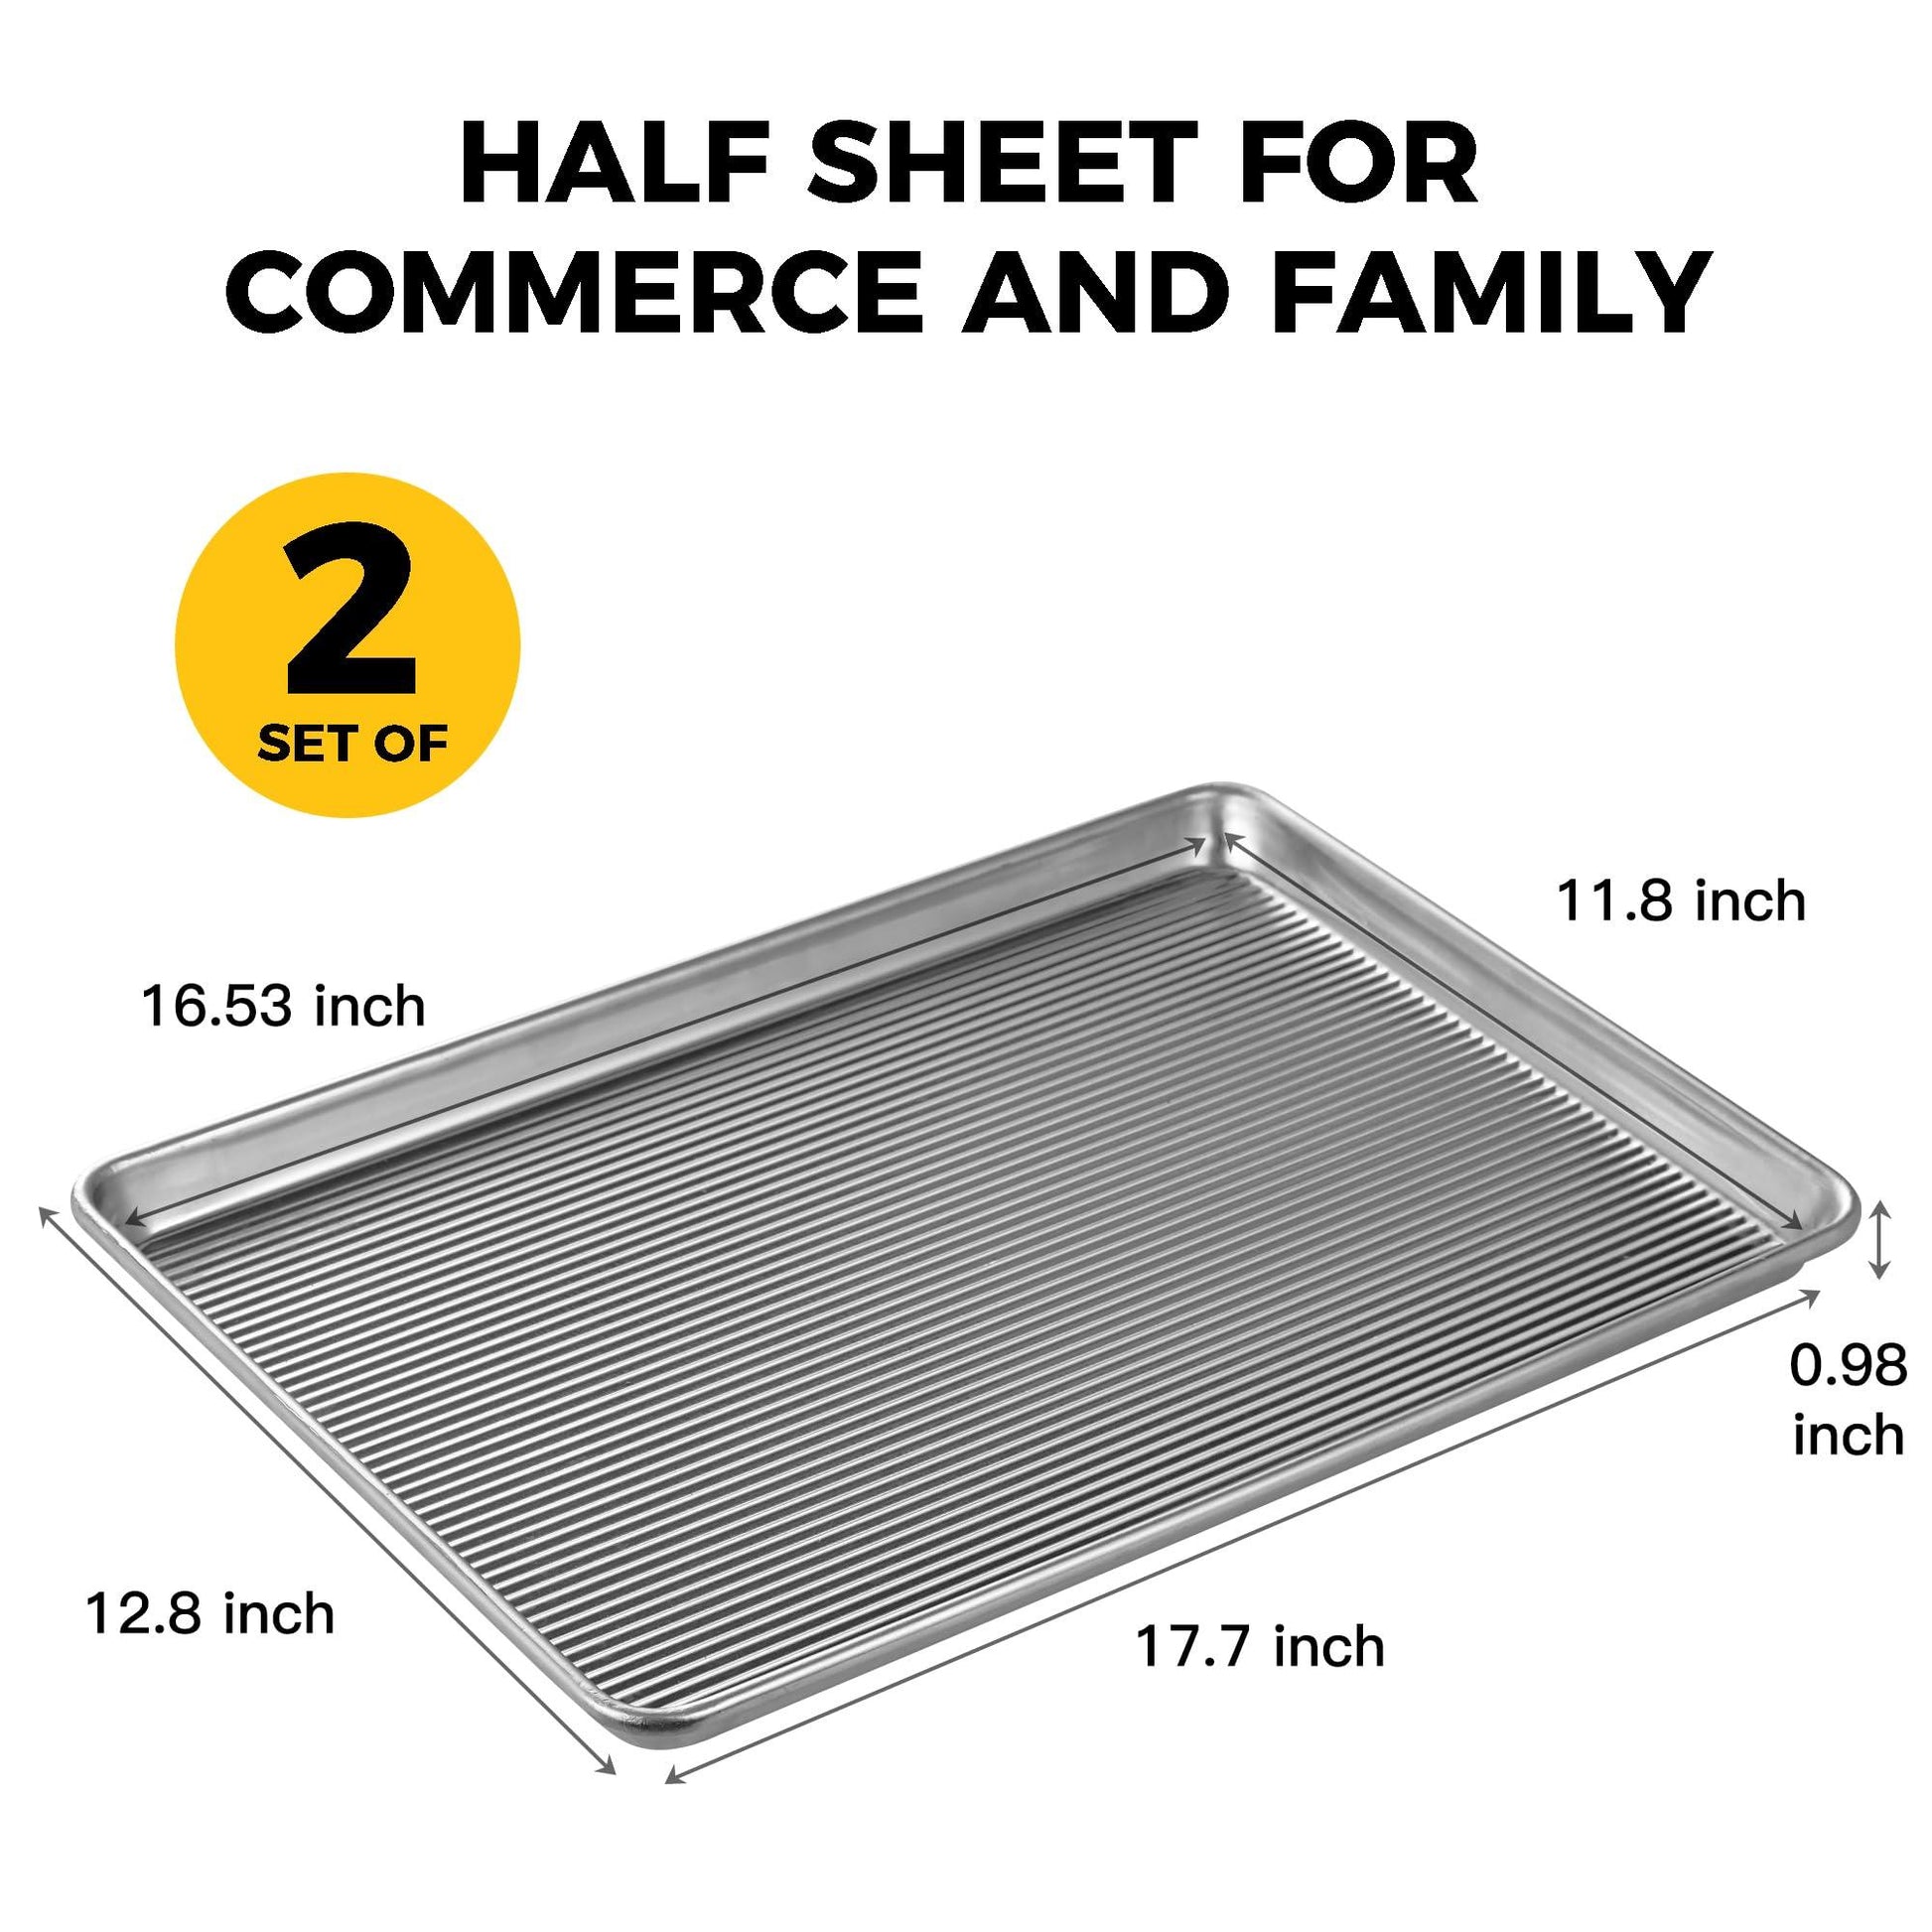 HONGBAKE 2-Pack Natural Aluminum Commercial Half Baking Sheet Pan, Non-Stick Cookie Sheets for Baking with 50 PCS Parchment Paper, 12.8 x 17.7 in, Silver - CookCave